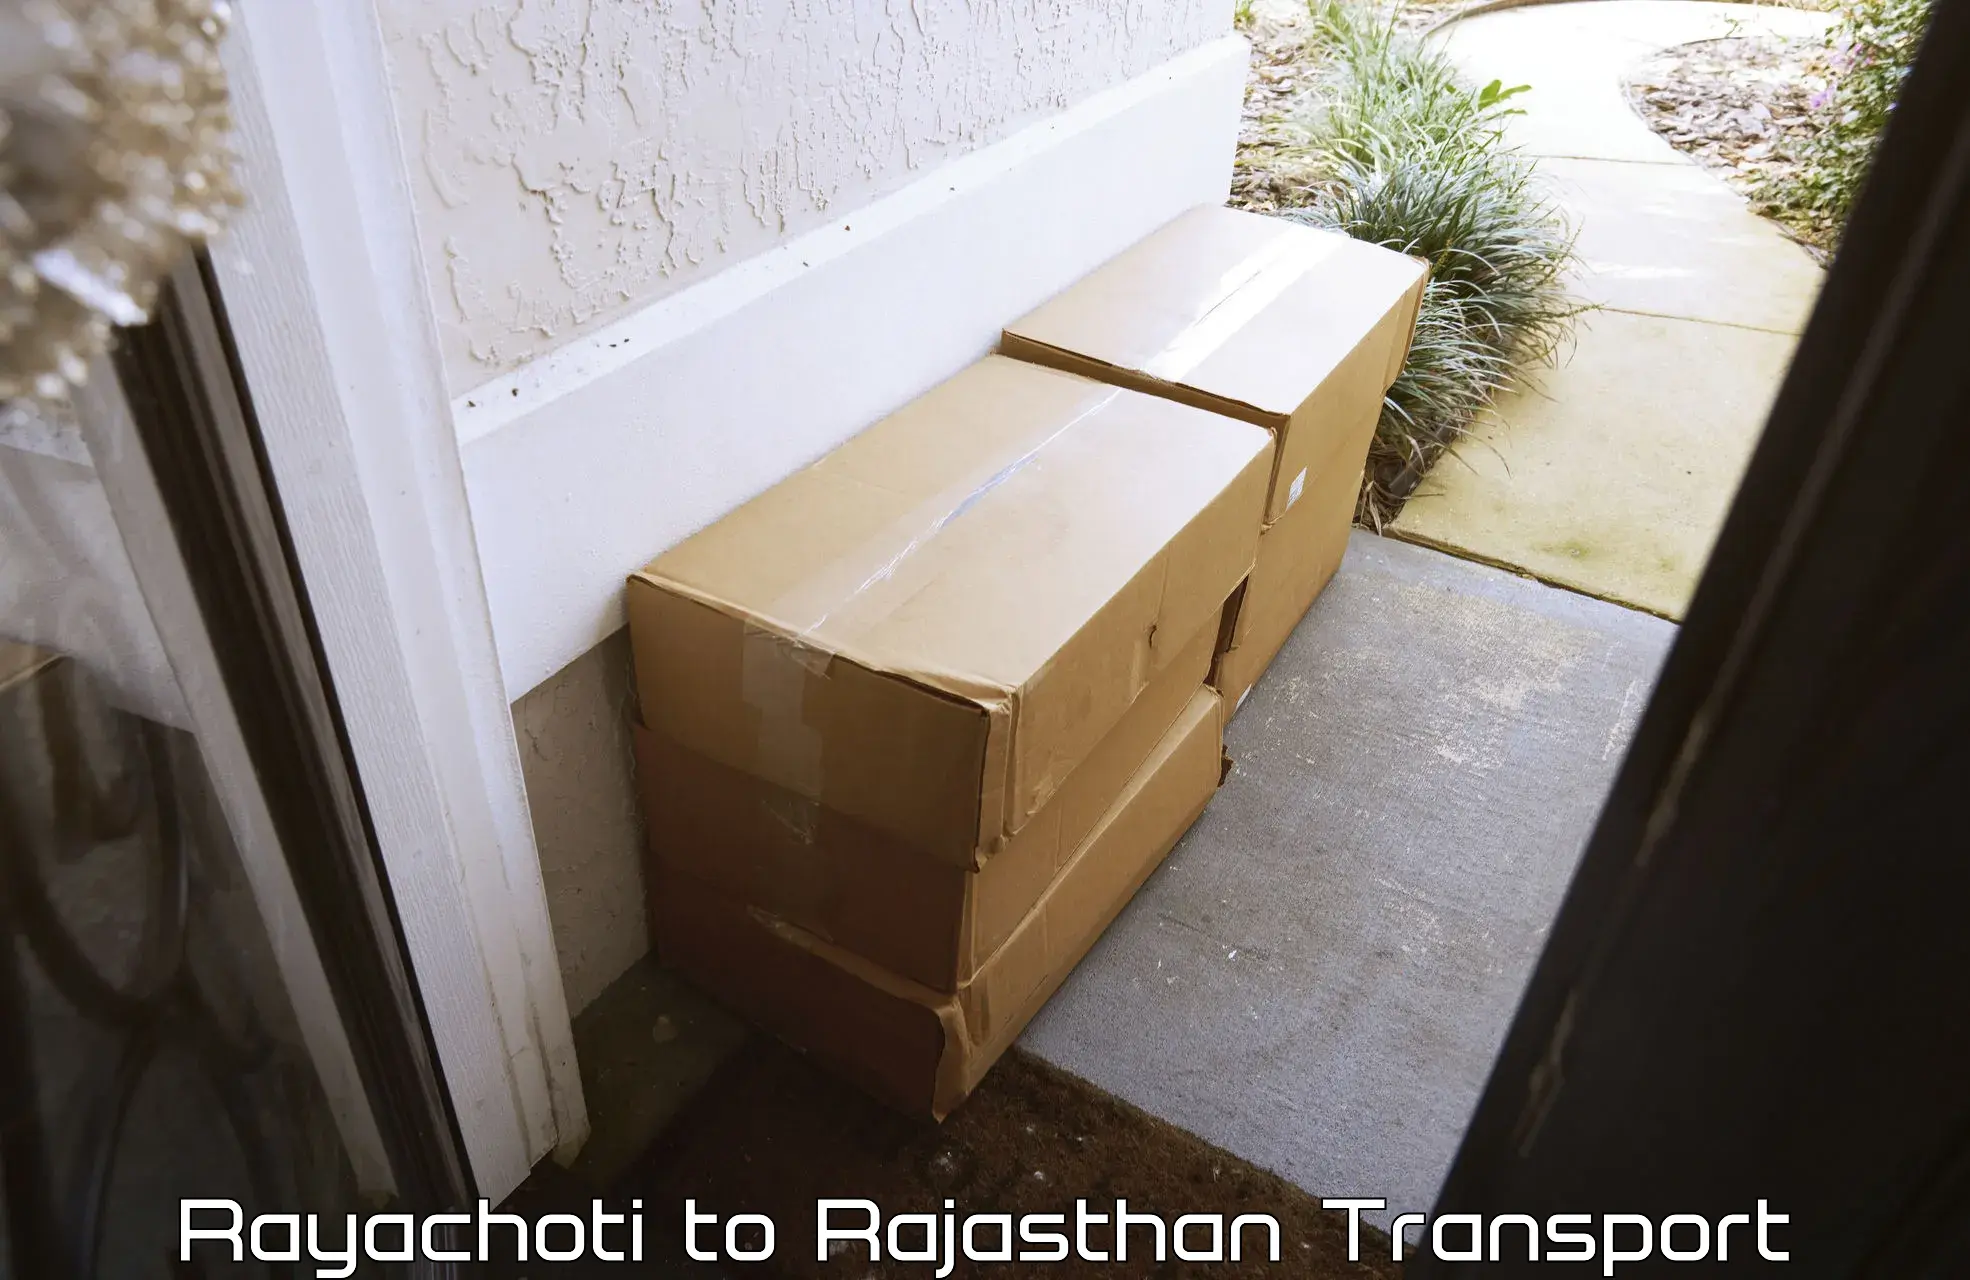 Goods delivery service Rayachoti to Rajasthan